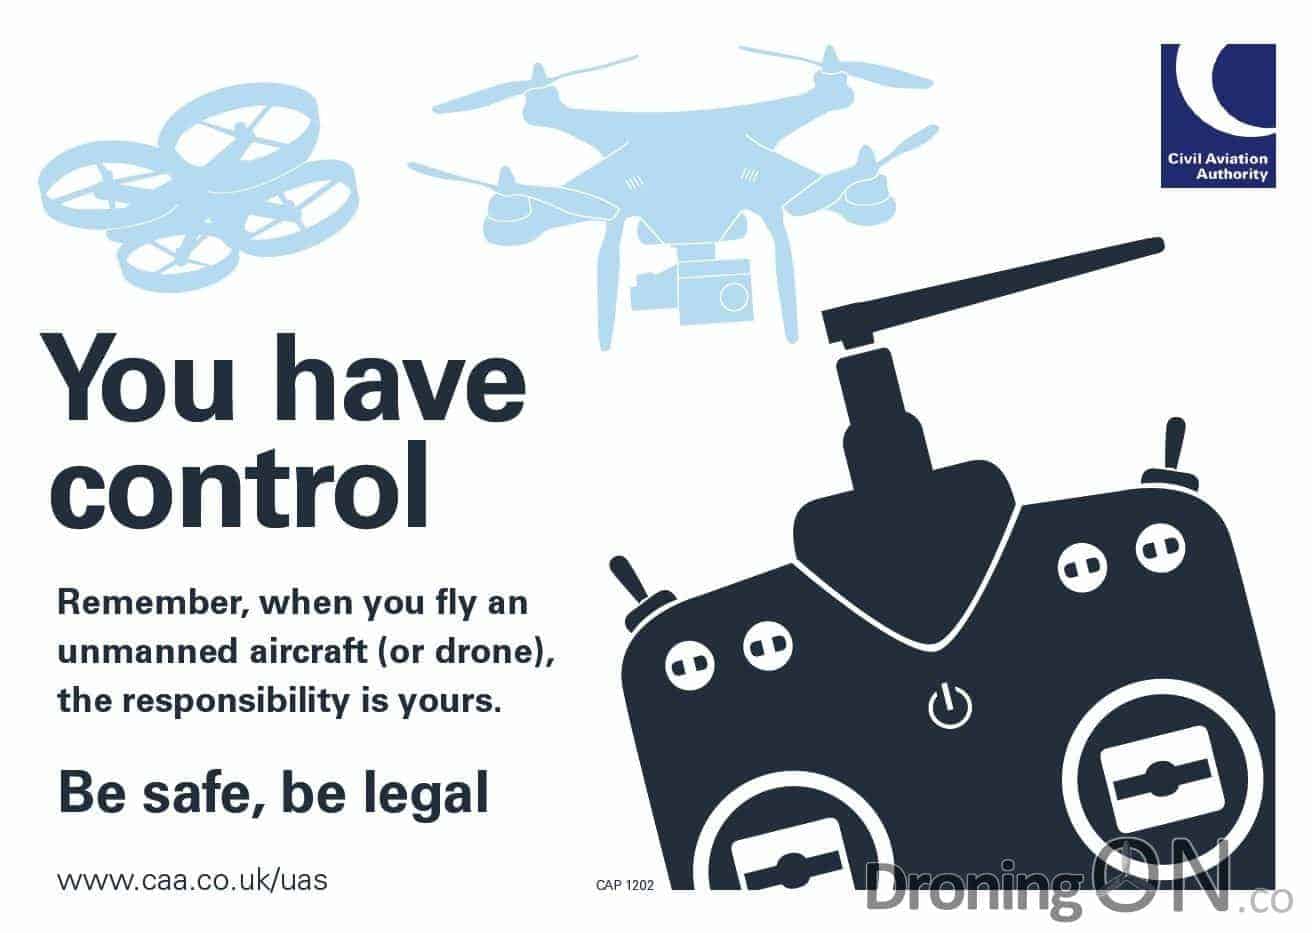 CAA Drone Safety Poster.